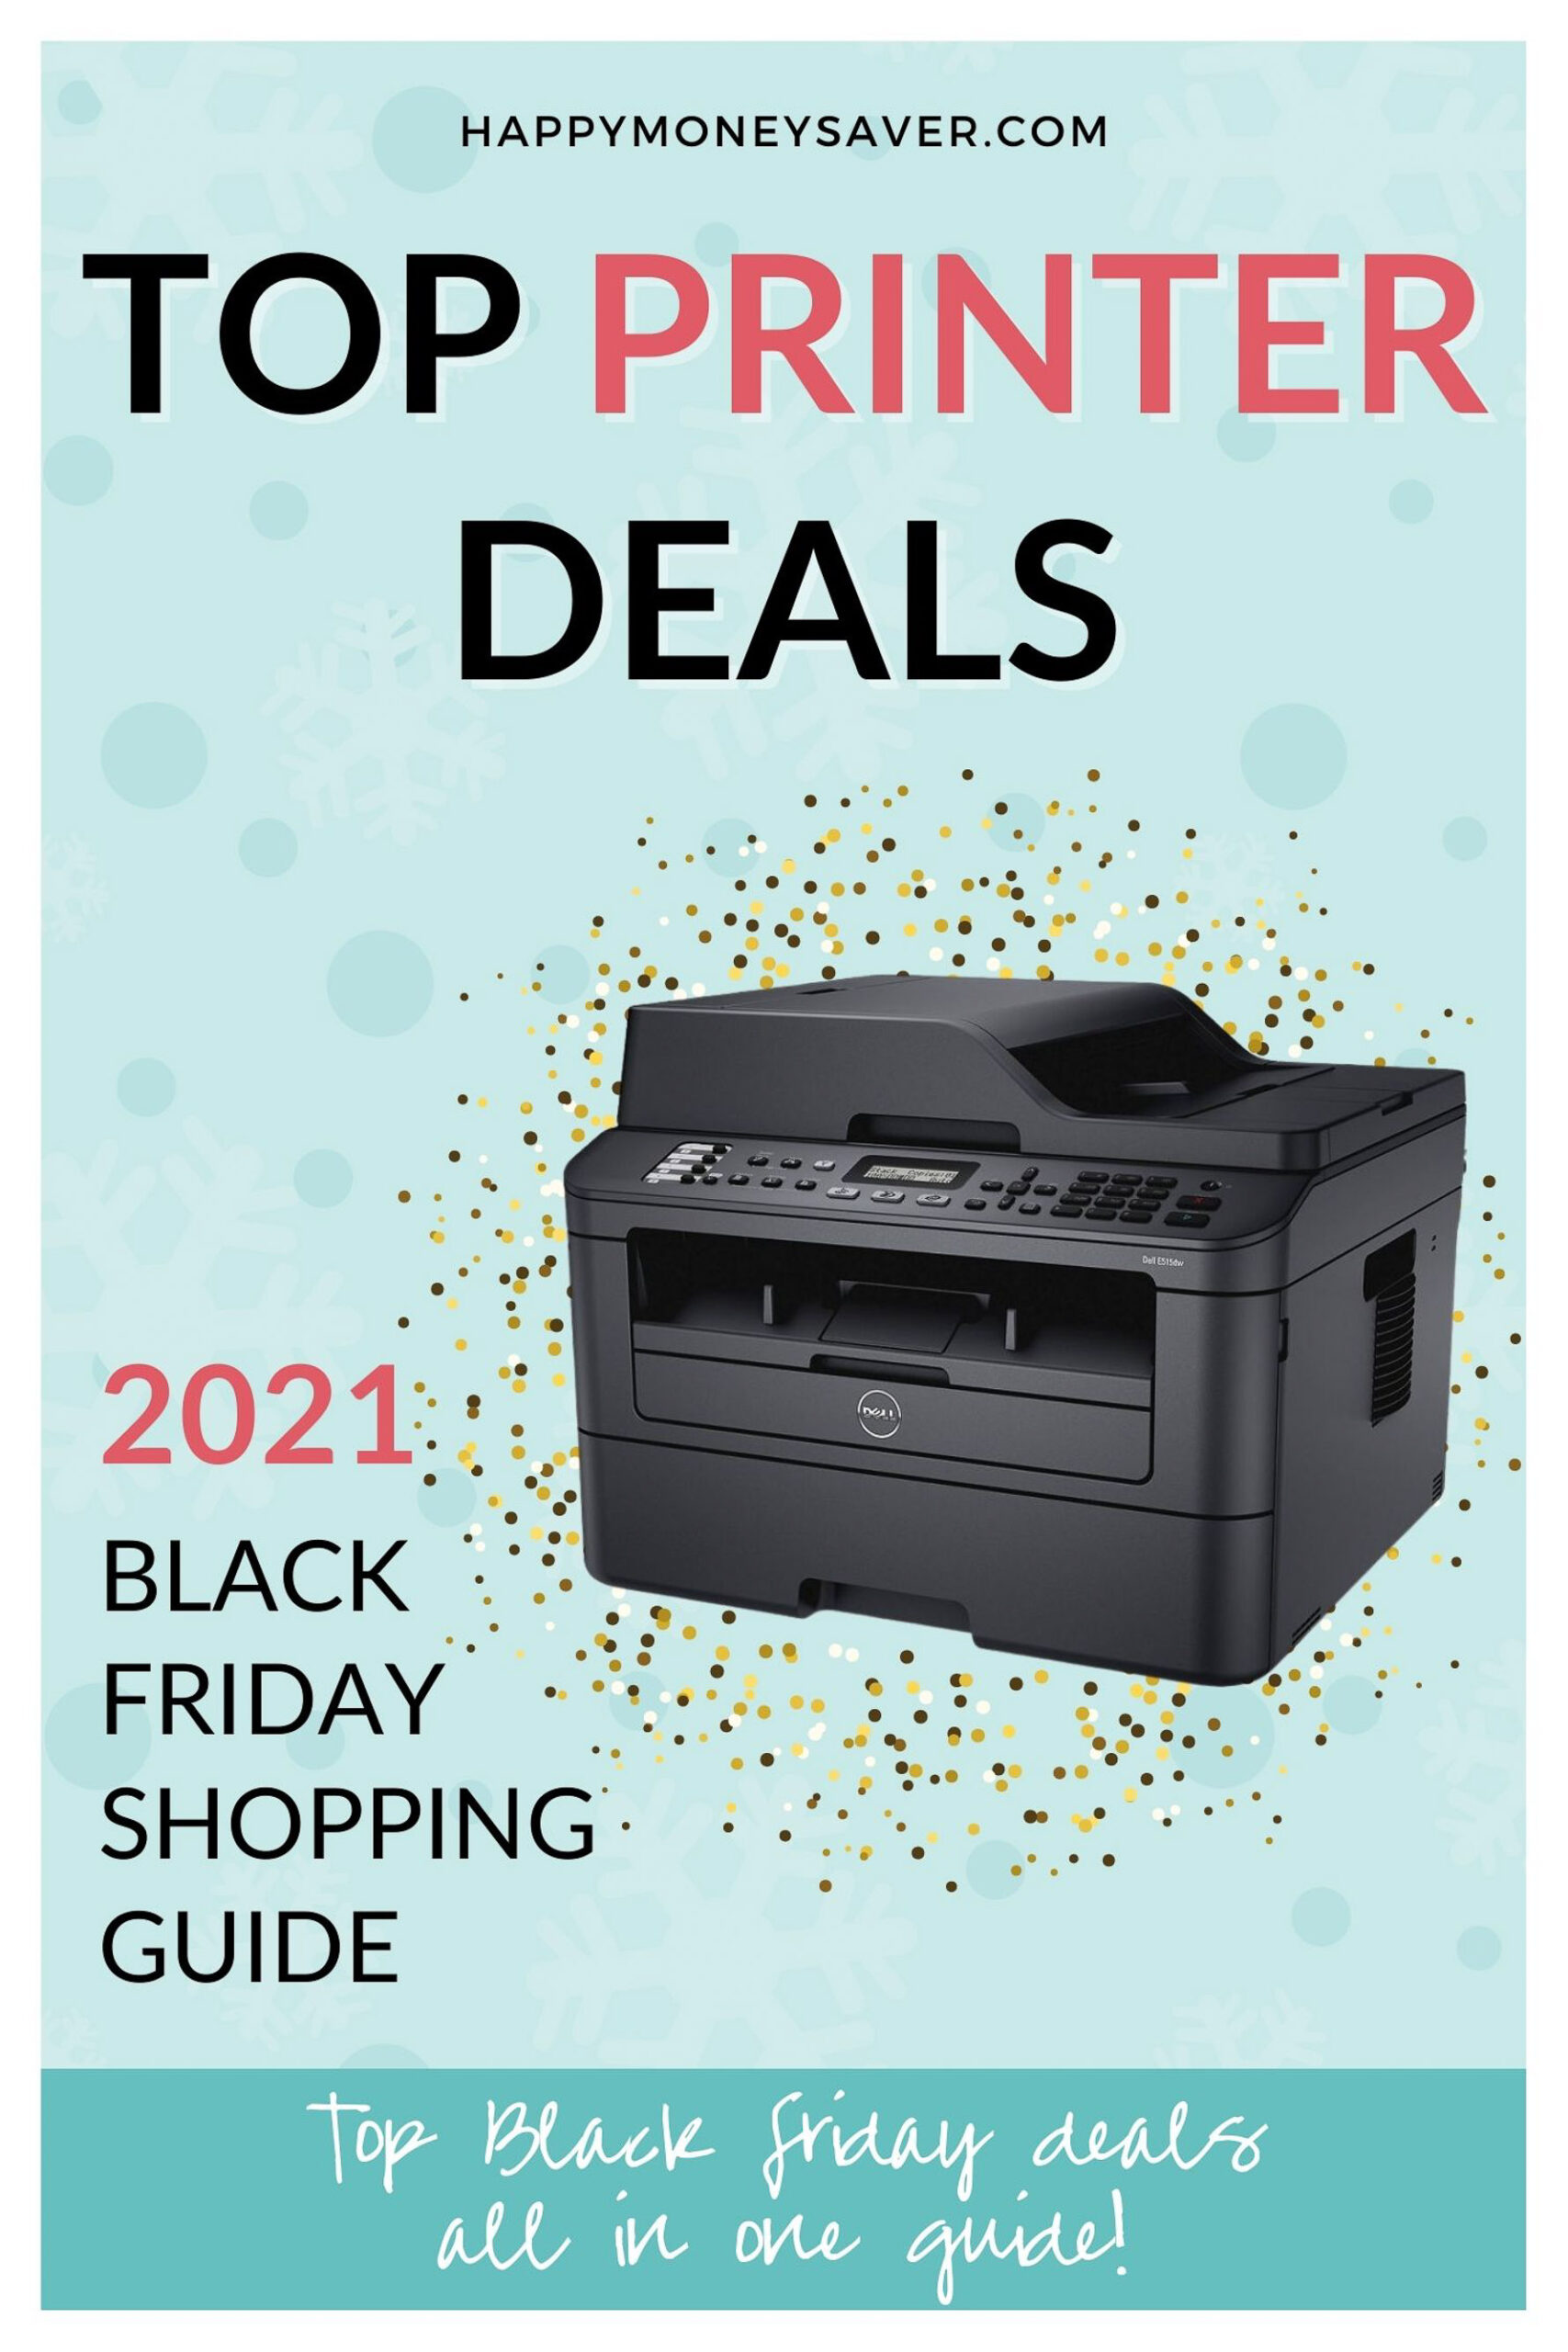 Image with text on it saying Top Printer Deals! For Black Friday 2021. Research by happymoneysaver.com and a printer is pictured.